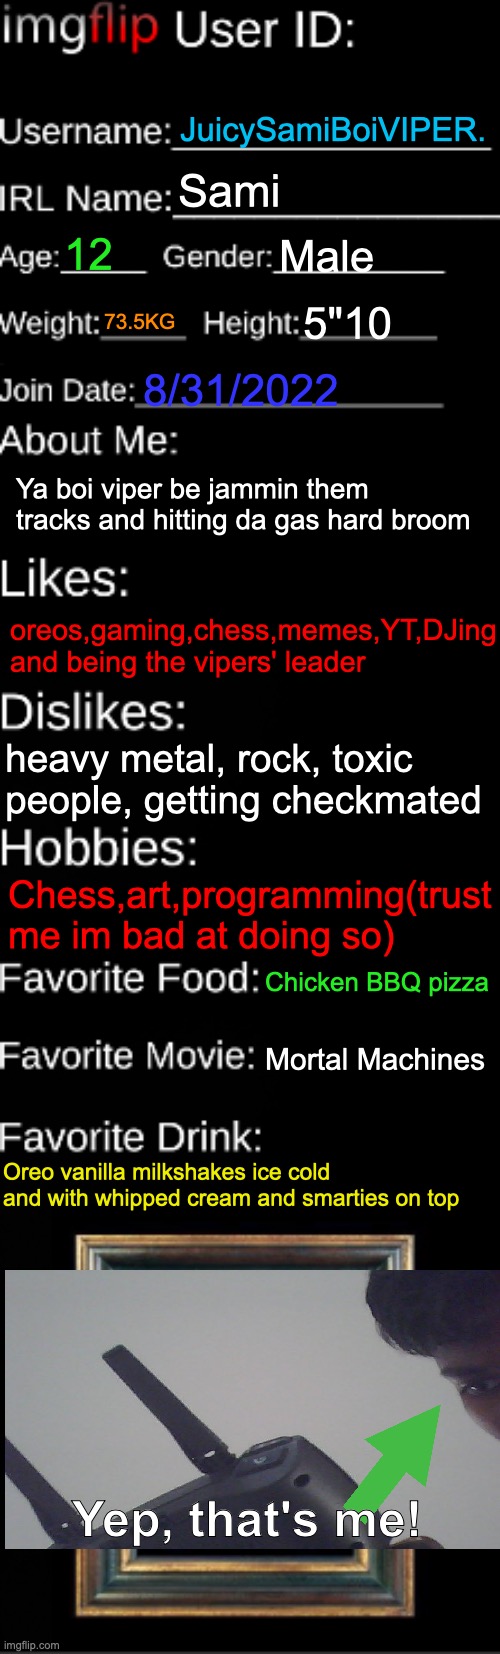 [UPDATED] Get to know about me =) | JuicySamiBoiVIPER. Sami; 12; Male; 73.5KG; 5"10; 8/31/2022; Ya boi viper be jammin them tracks and hitting da gas hard broom; oreos,gaming,chess,memes,YT,DJing and being the vipers' leader; heavy metal, rock, toxic people, getting checkmated; Chess,art,programming(trust me im bad at doing so); Chicken BBQ pizza; Mortal Machines; Oreo vanilla milkshakes ice cold and with whipped cream and smarties on top; Yep, that's me! | image tagged in imgflip id card,abt me,sami,info | made w/ Imgflip meme maker